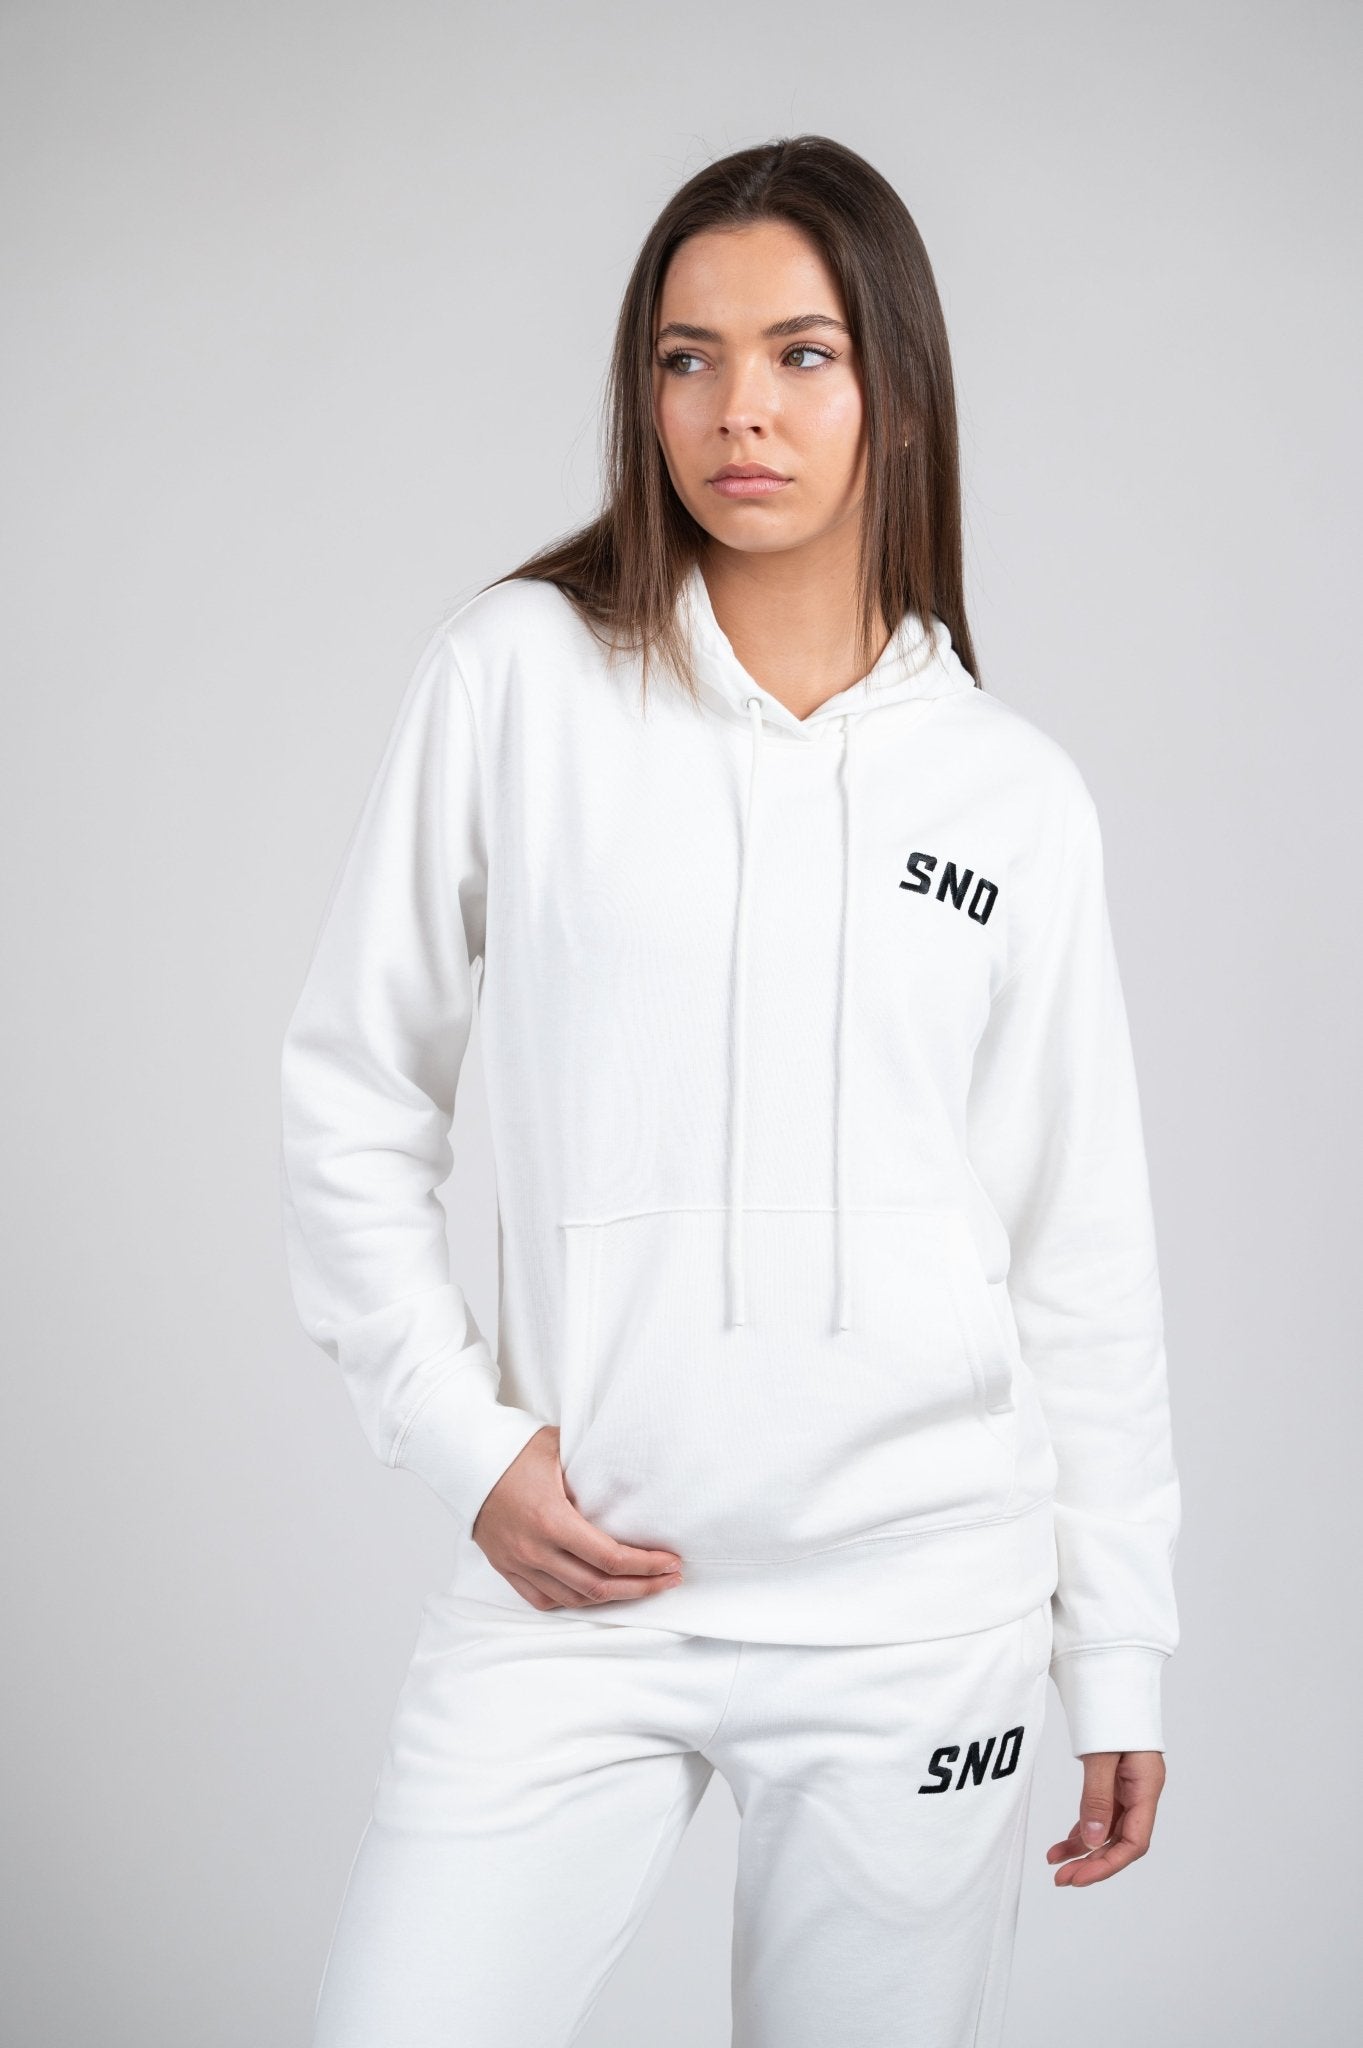 Unisex French Terry Hoodie - SNO